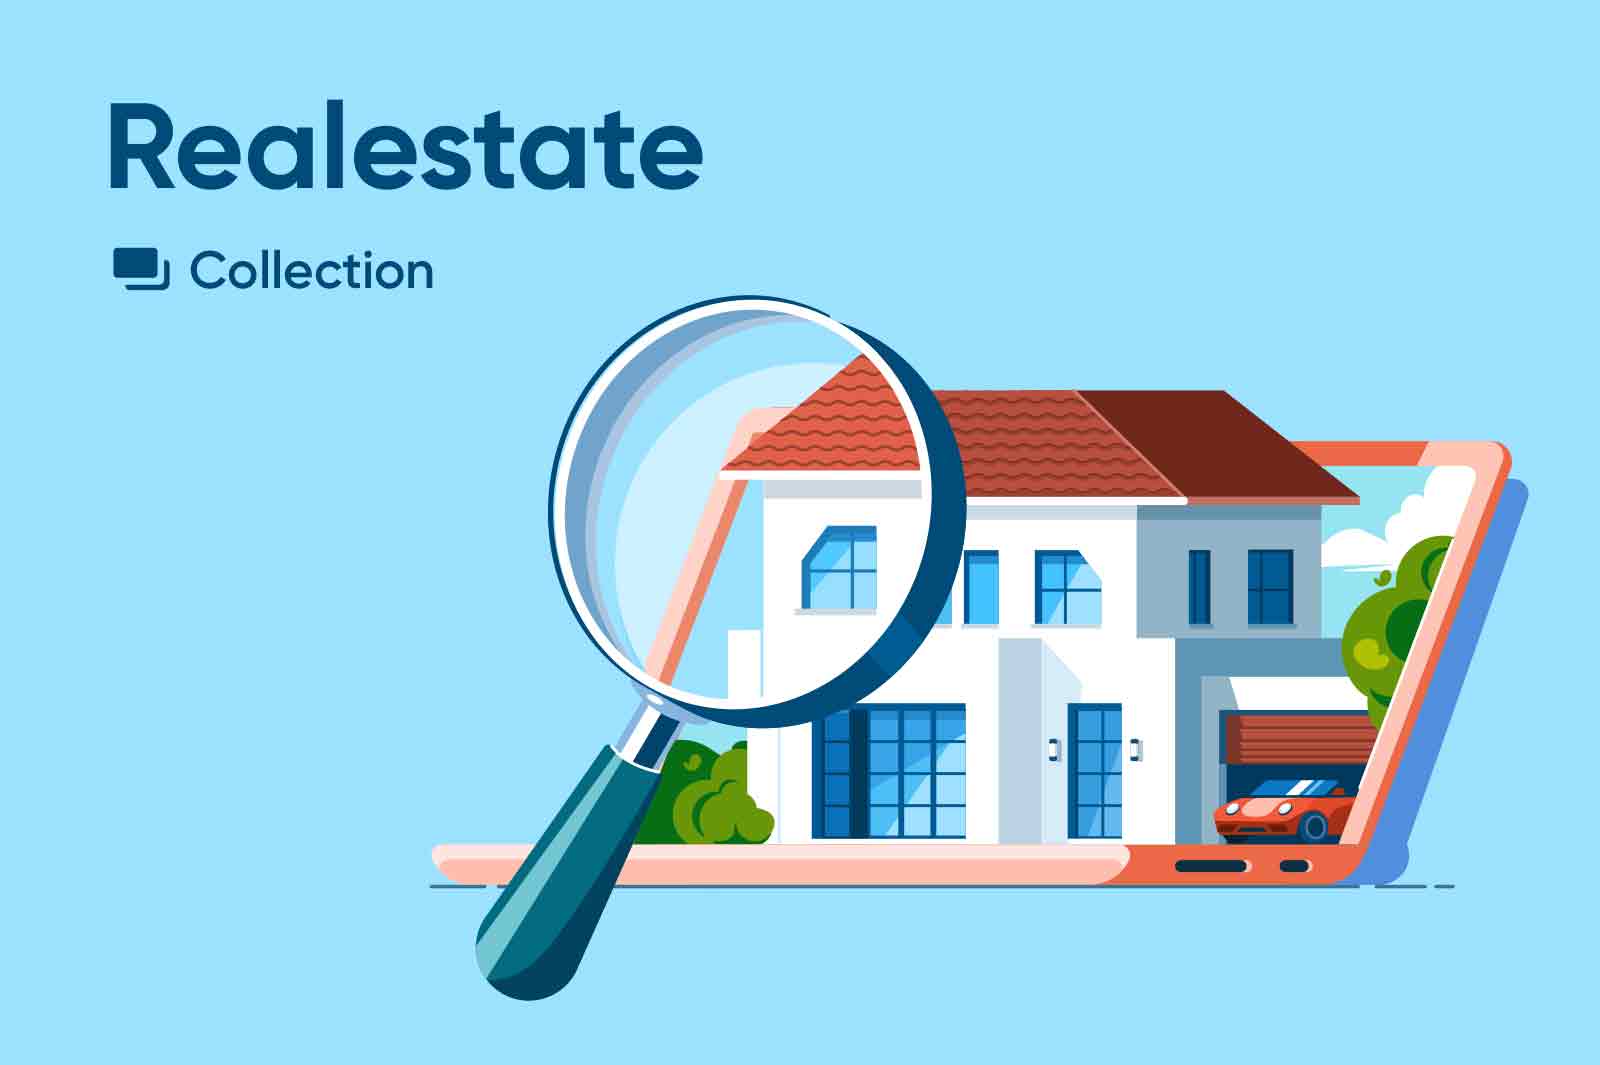 All about real estate: search, prices, purchase, sale. Illustrations about selection of the best option for housing or office.